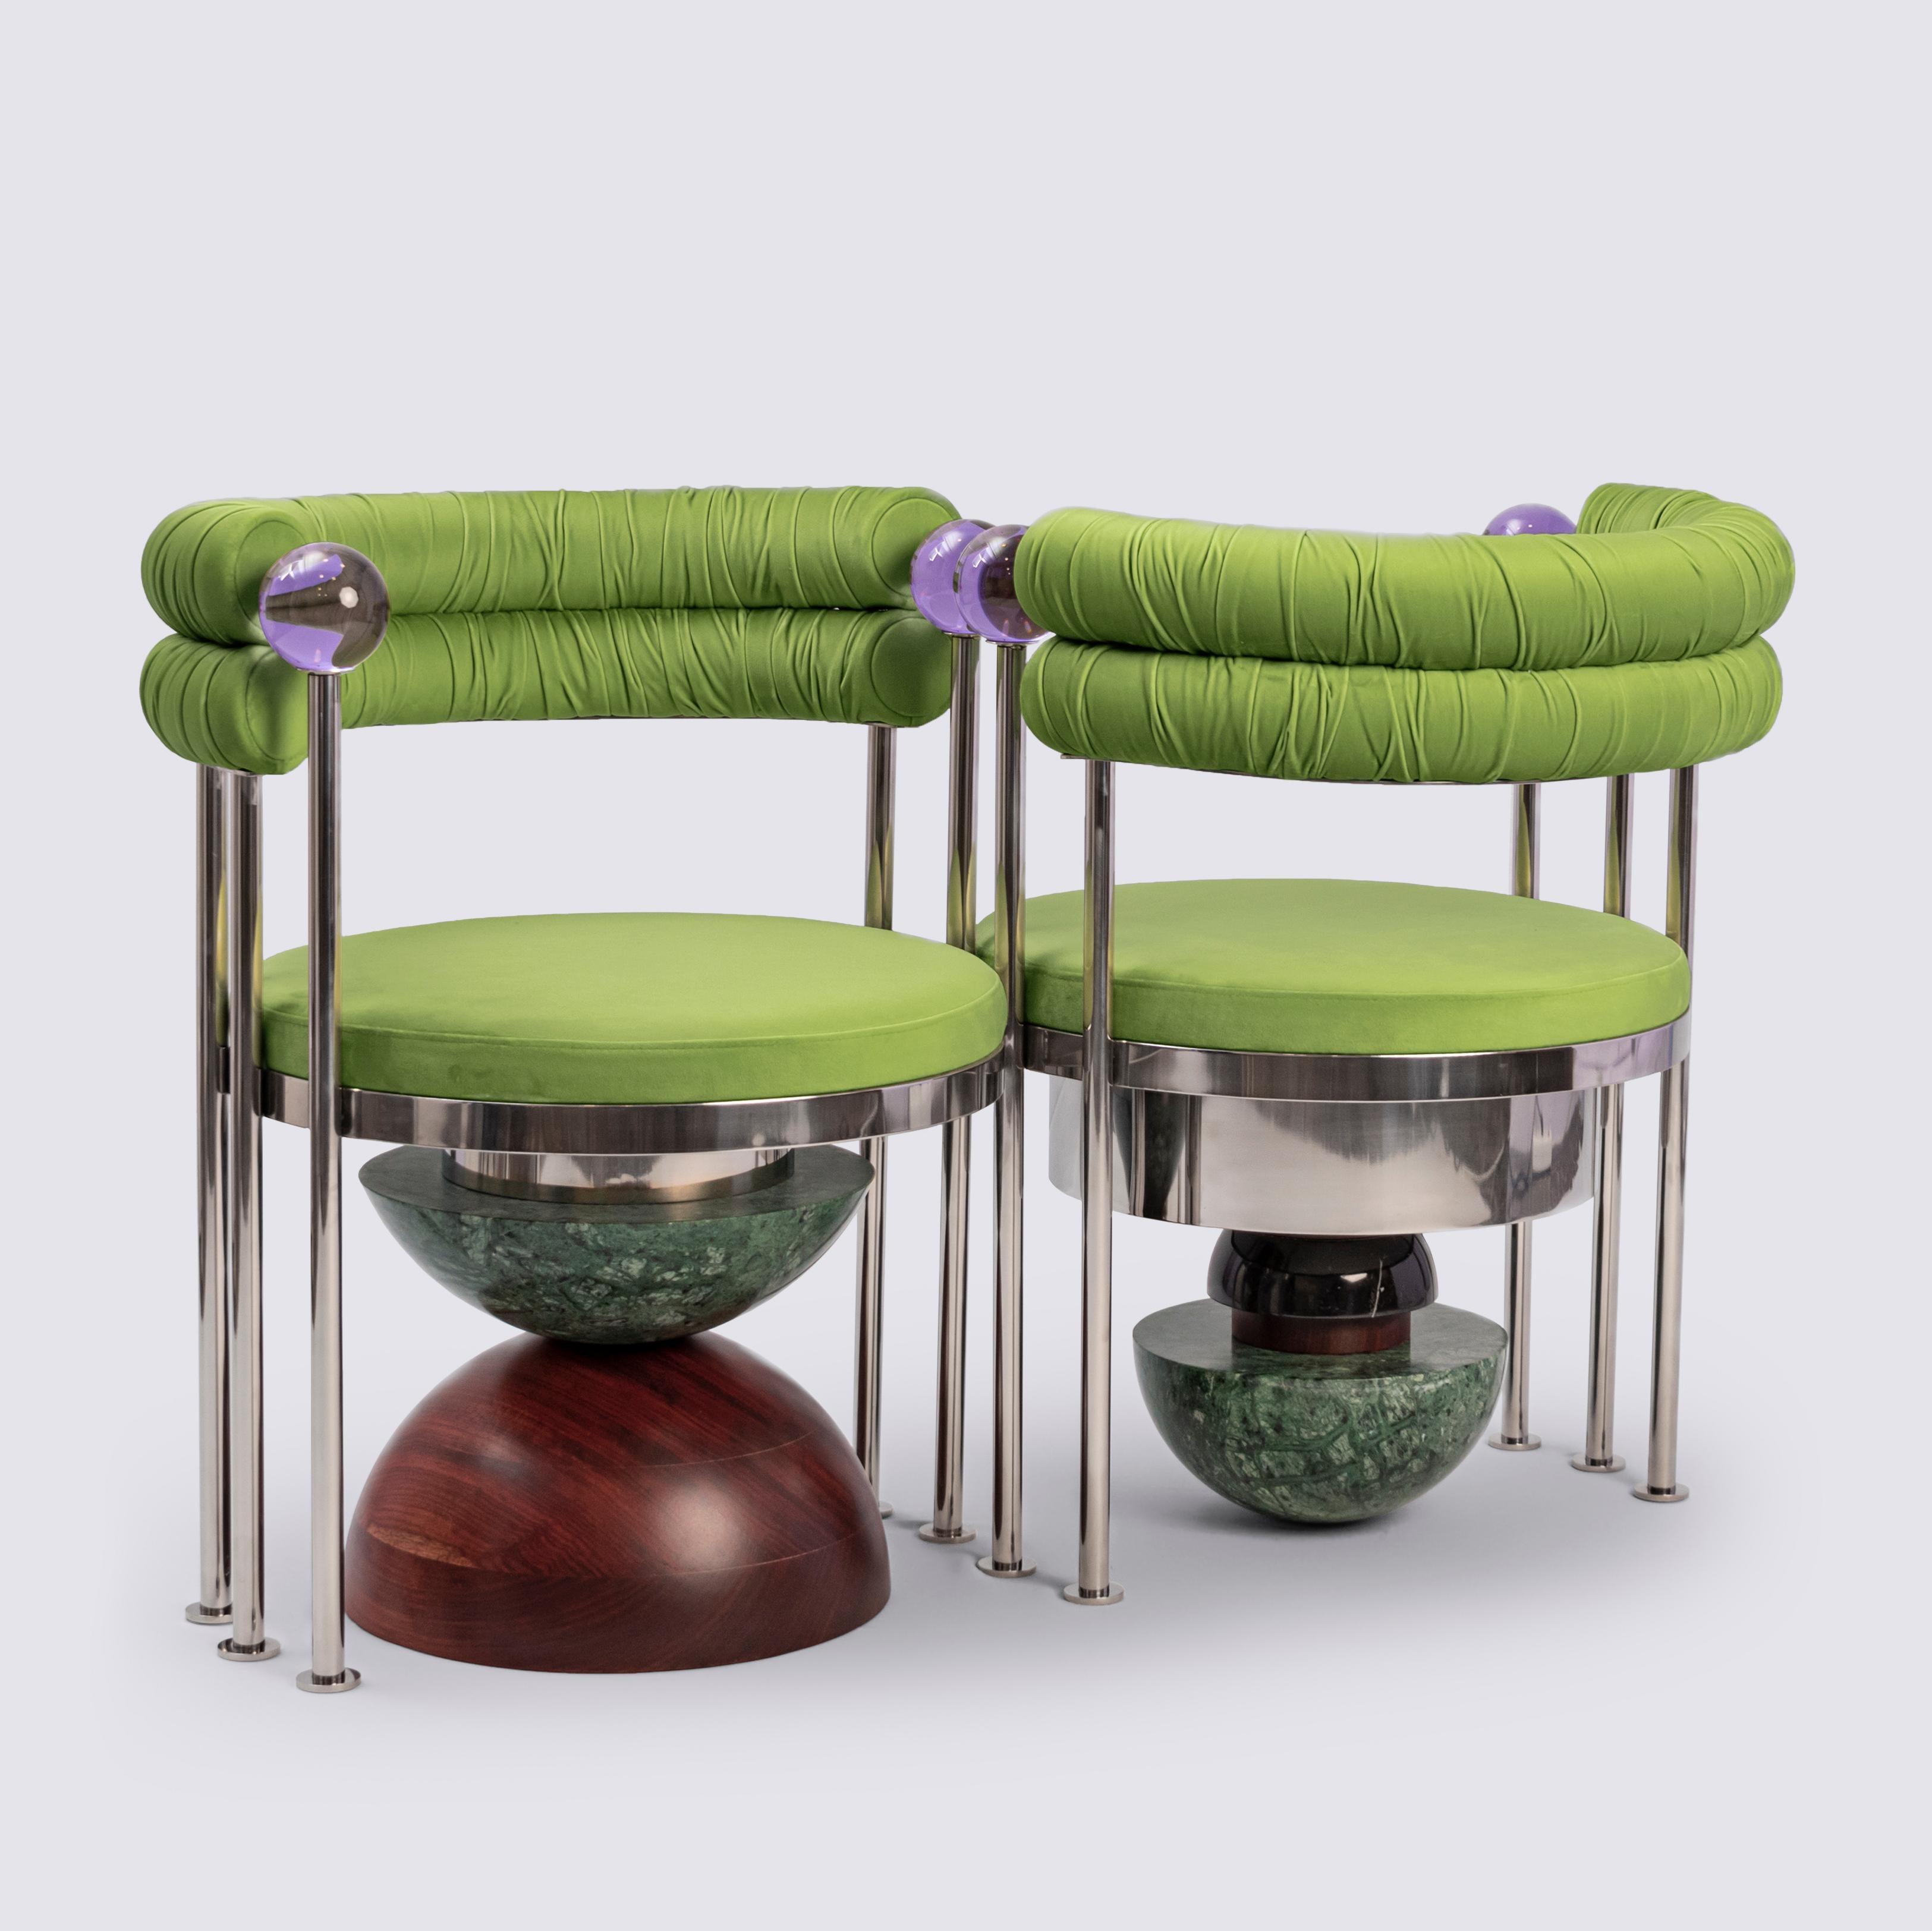 Secretaire chair from Mas Creations by Masquespacio
Dimensions: 60 x 112 x H 70.2 cm
Materials: stainless steel, inkjet printed velvet, high density polyurethane foam padding, Green Indio marble, Black Devonian marble, Etimoe Wood, glass

The